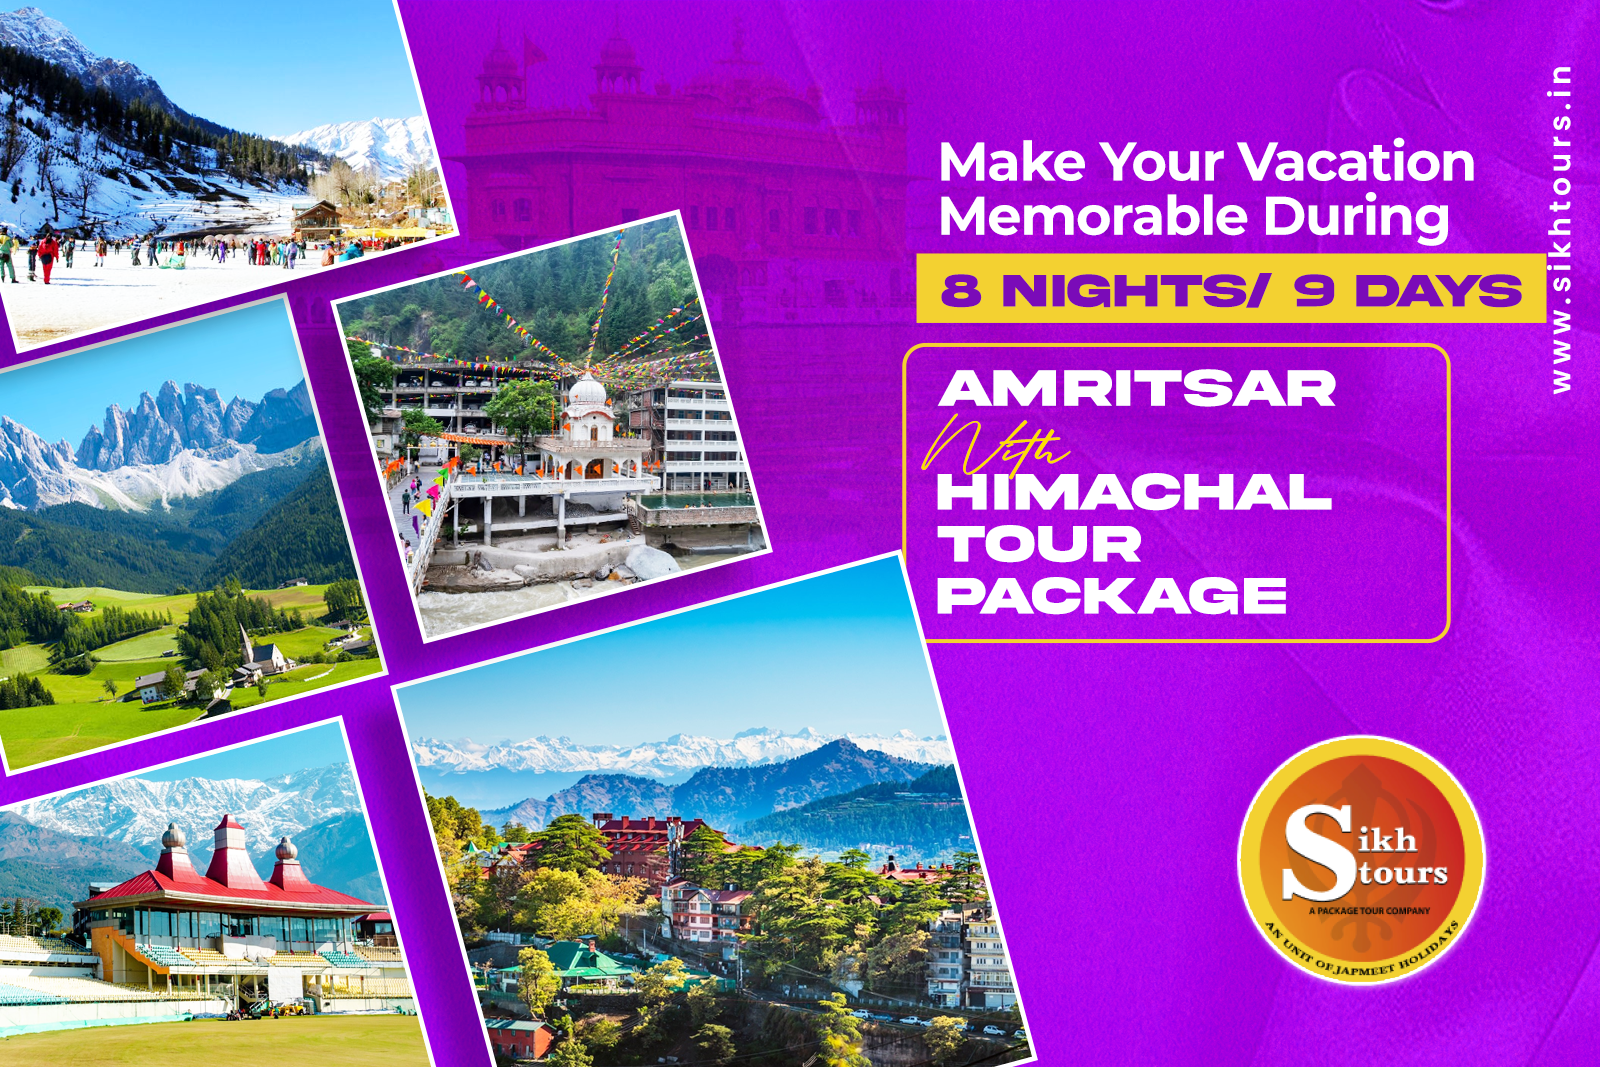 Make Your Vacation Memorable During 8 Nights/ 9 Days Amritsar with Himachal Tour Packages